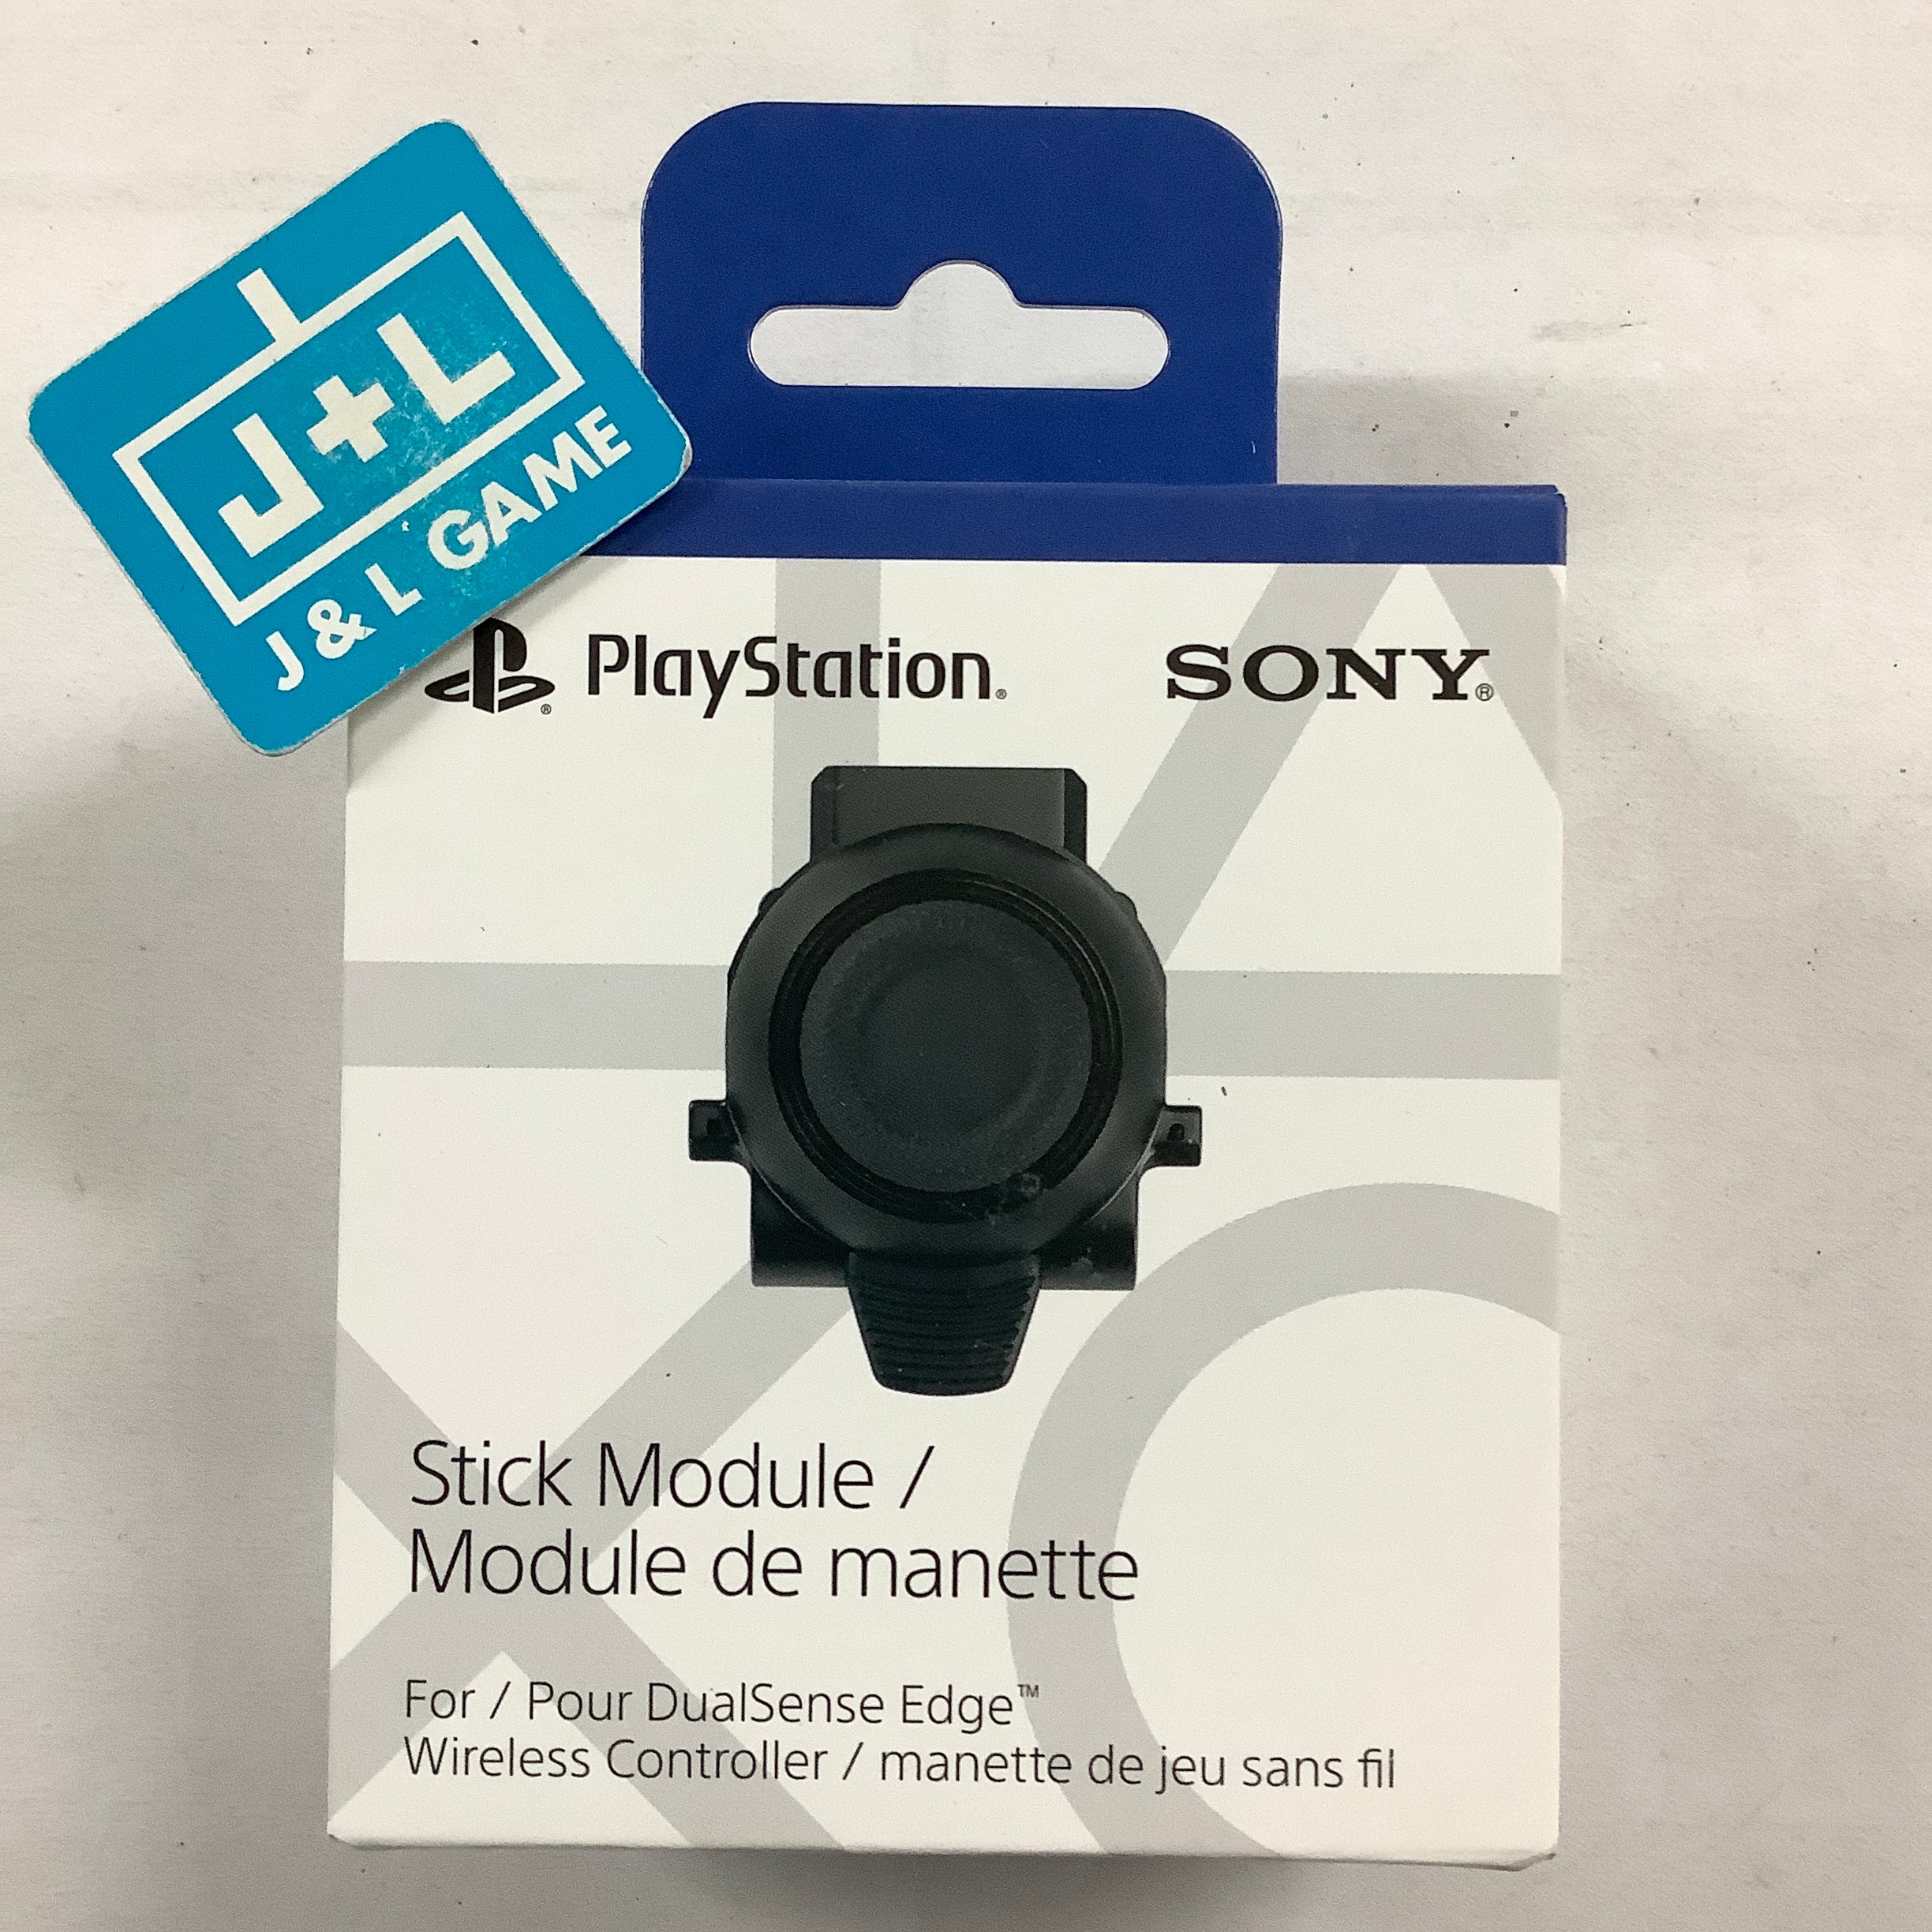 SONY PlayStation 5 DualSense Edge Wireless Controller Stick Module - (PS5) PlayStation 5 Accessories PlayStation   